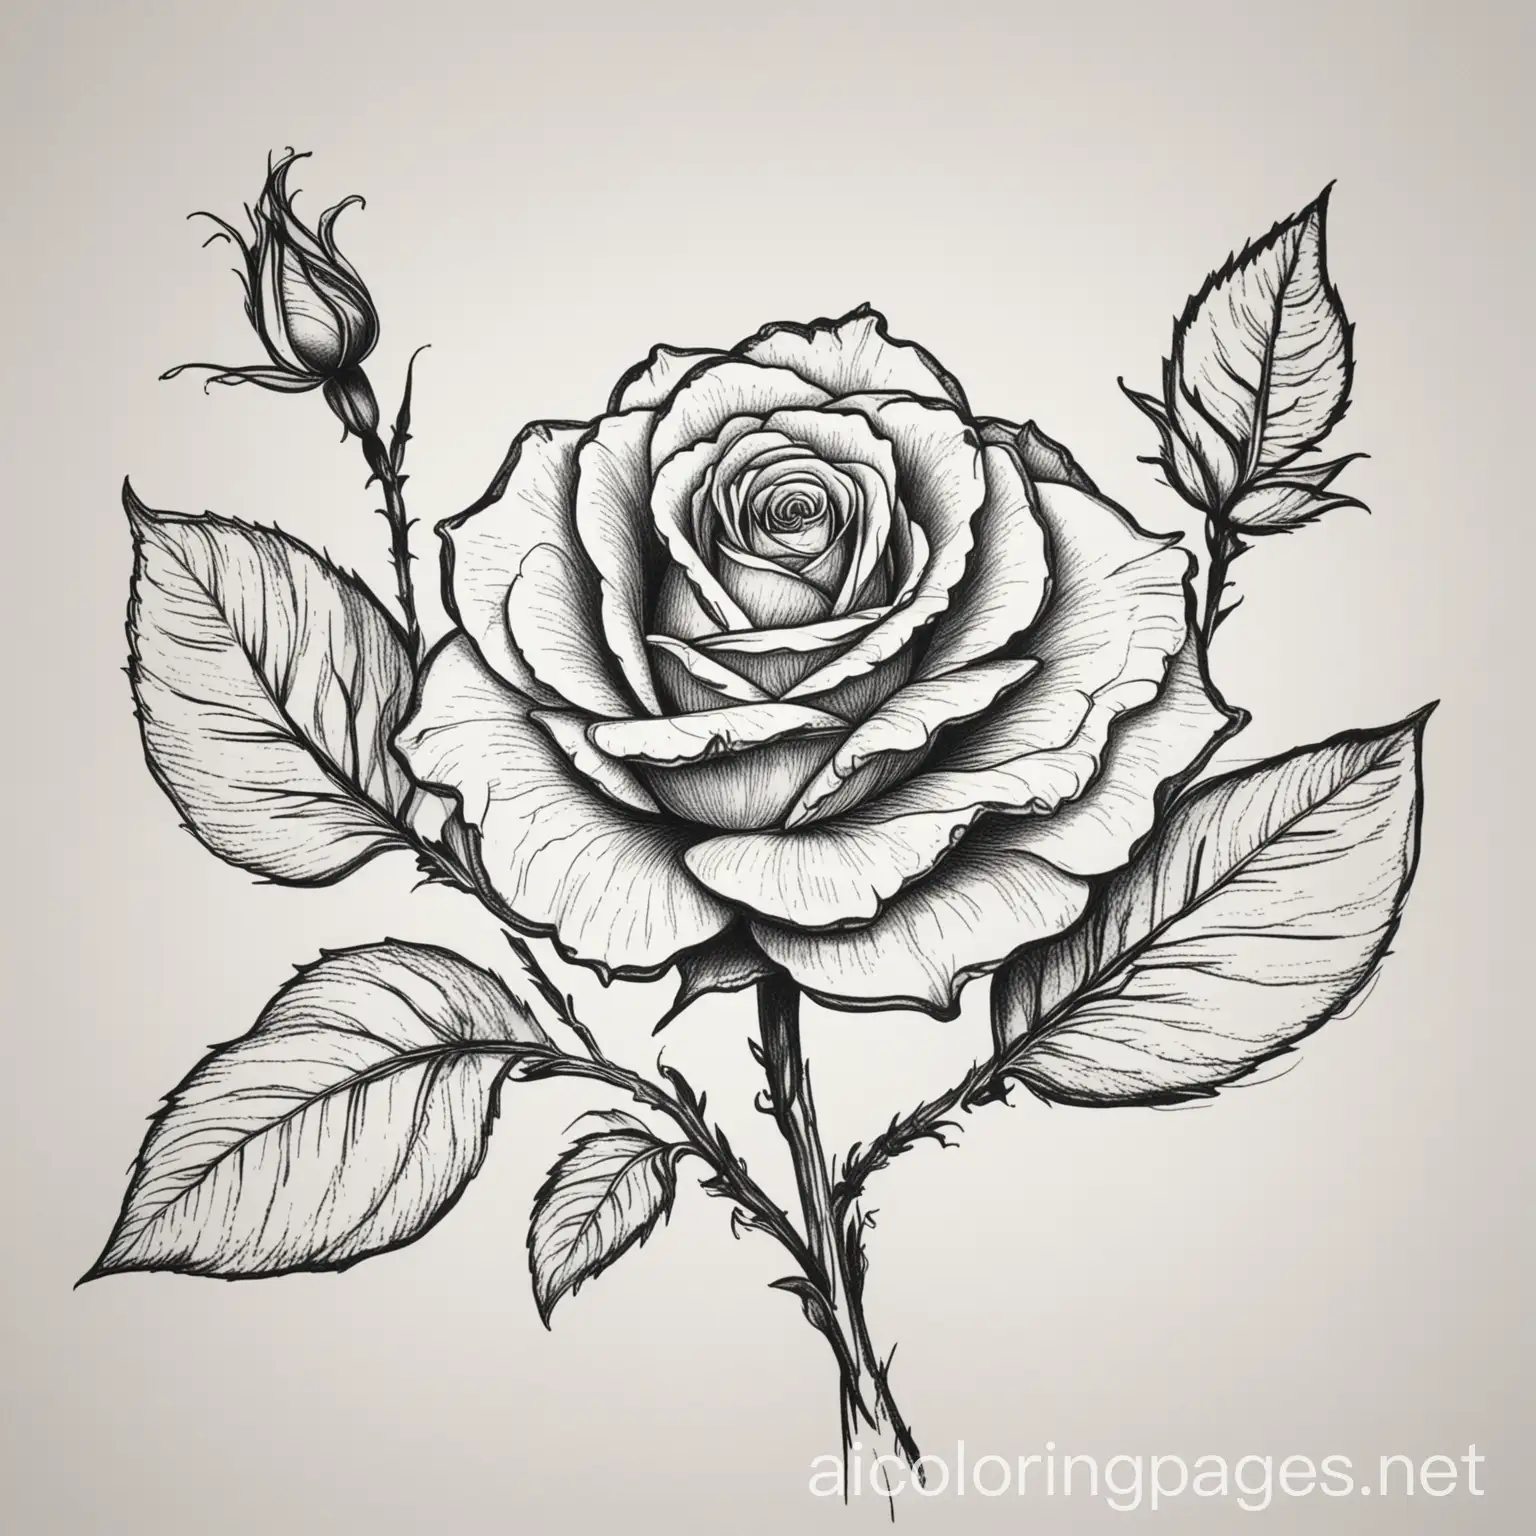 Simple-and-Elegant-Rose-Coloring-Page-Fully-Opened-Flower-with-Stem-and-Leaves